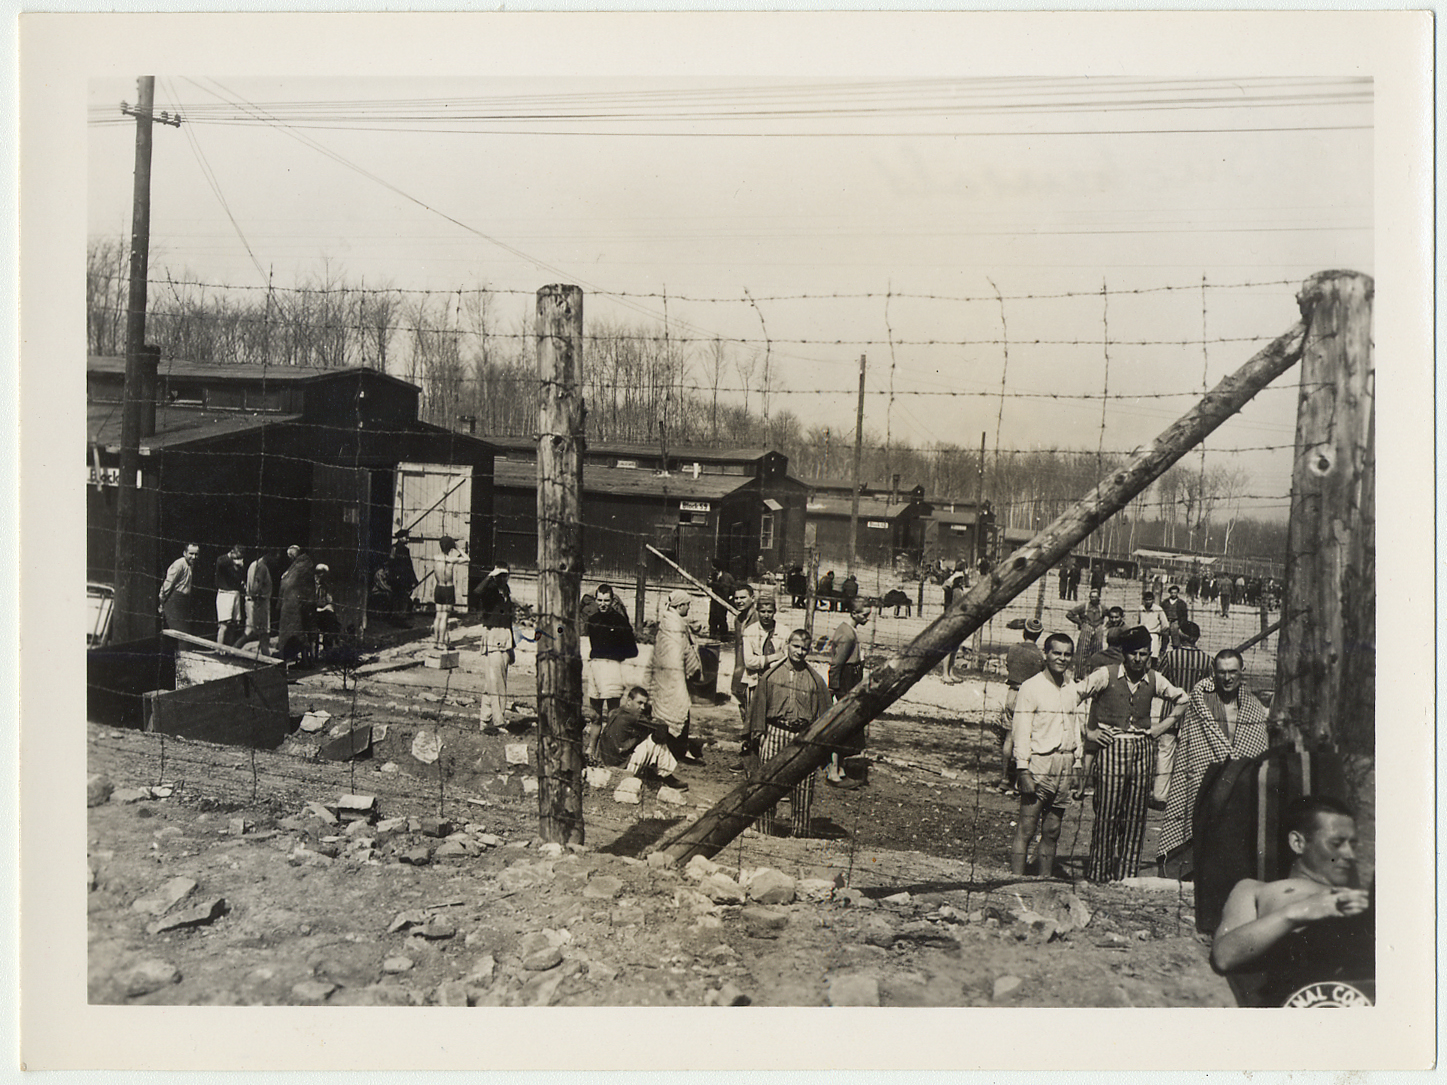 Survivors at the Buchenwald concentration camp shortly after liberation. Buchenwald (Germany), April 1945.